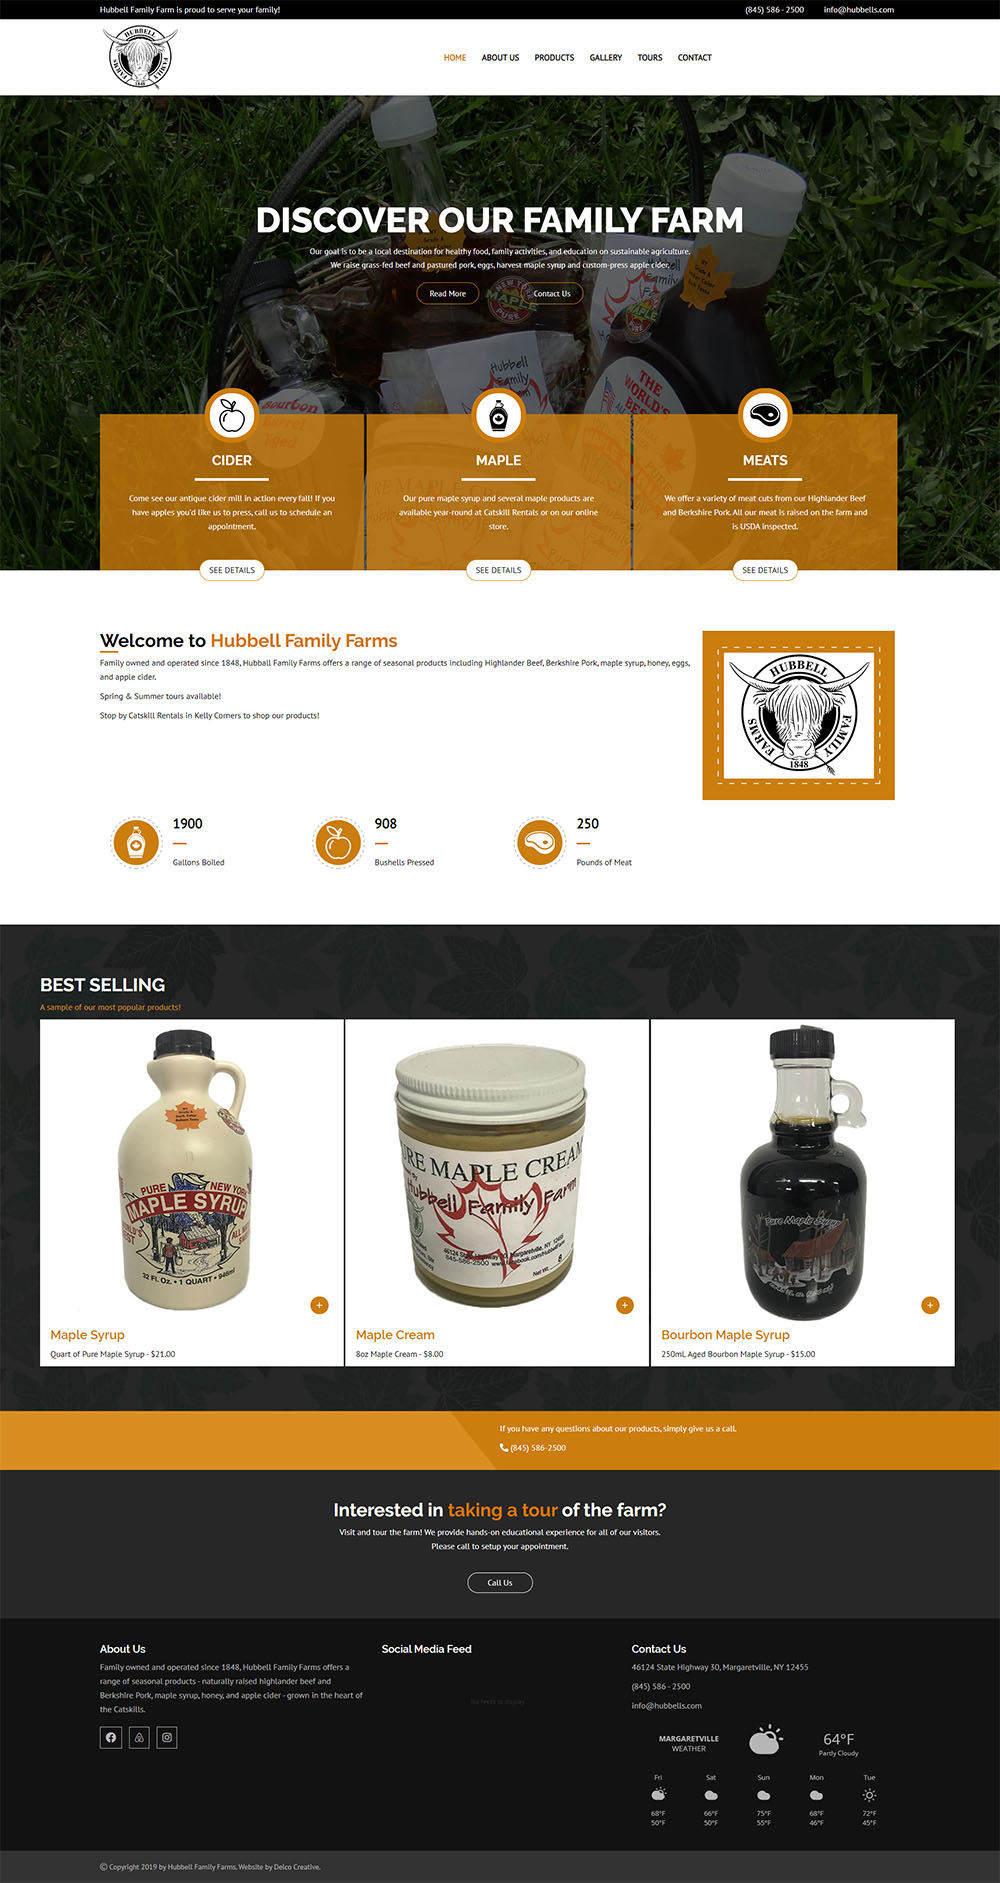 Hubbell Family Farms website